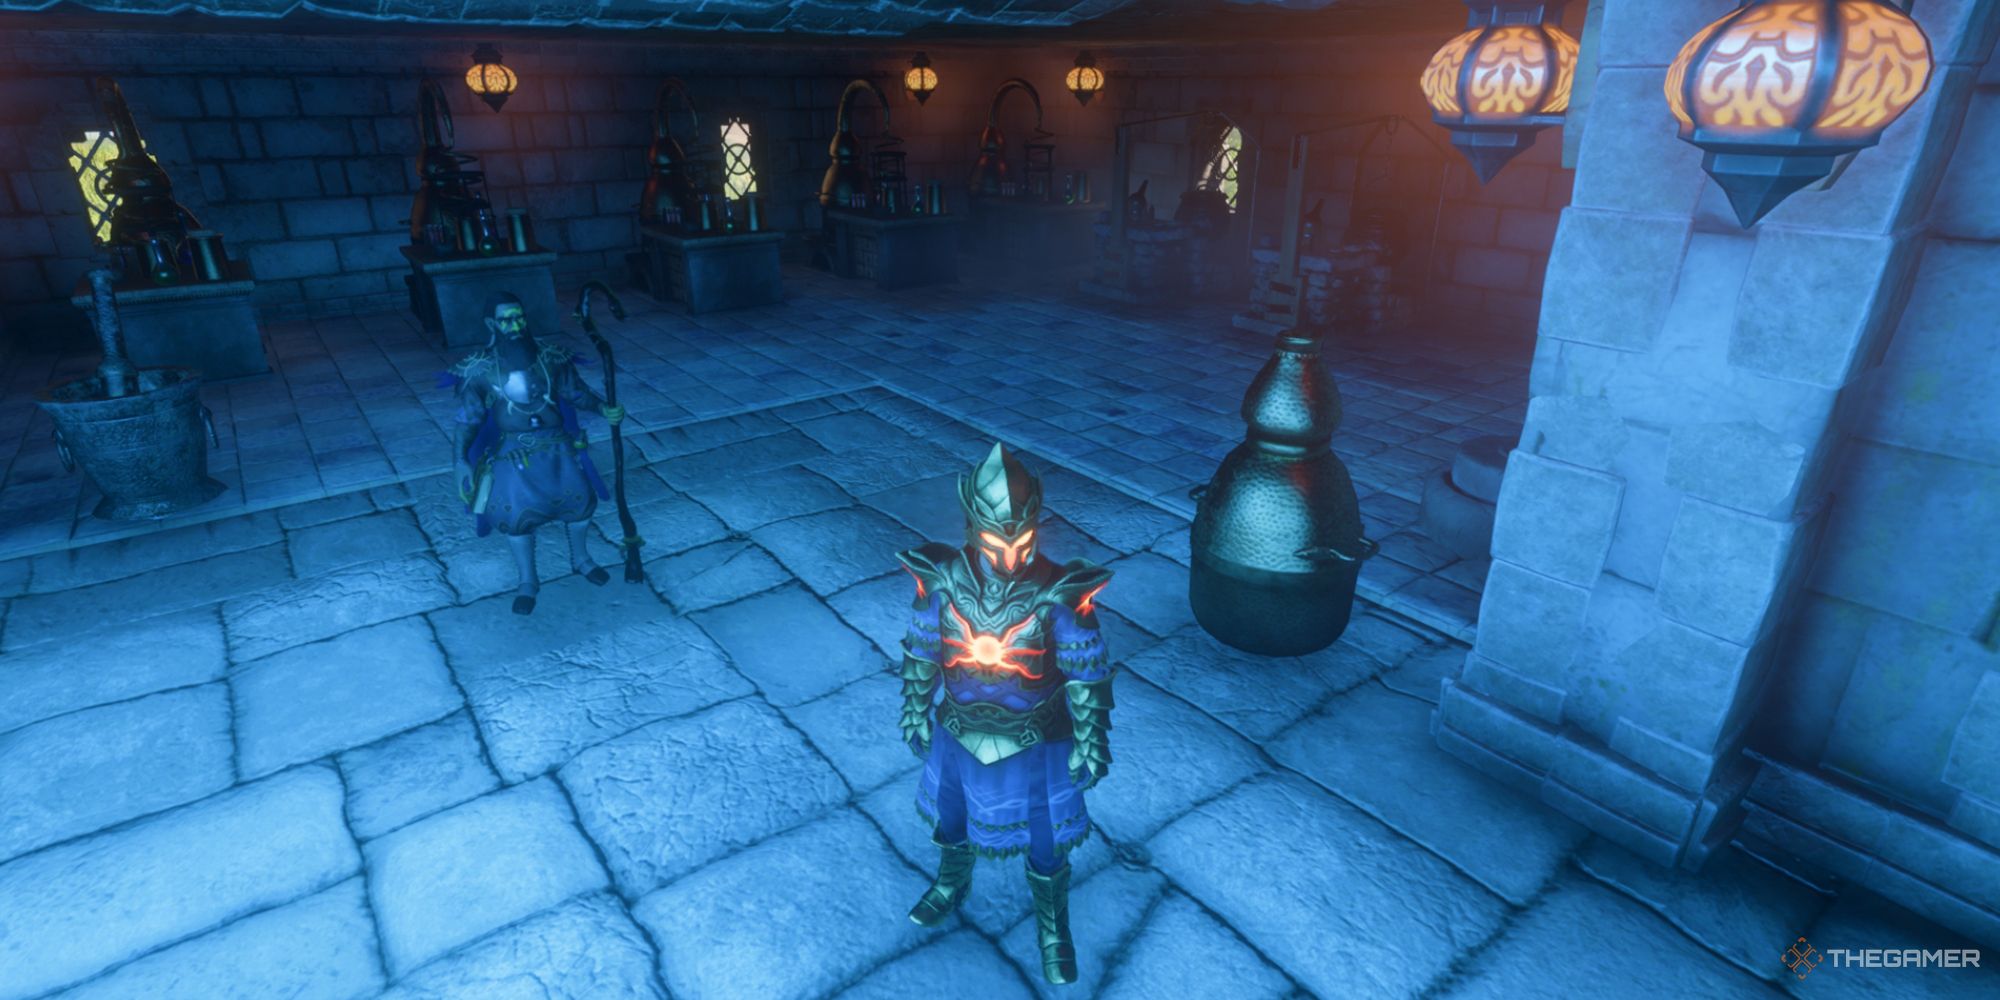 A player standing near Athanor in base in Enshrouded